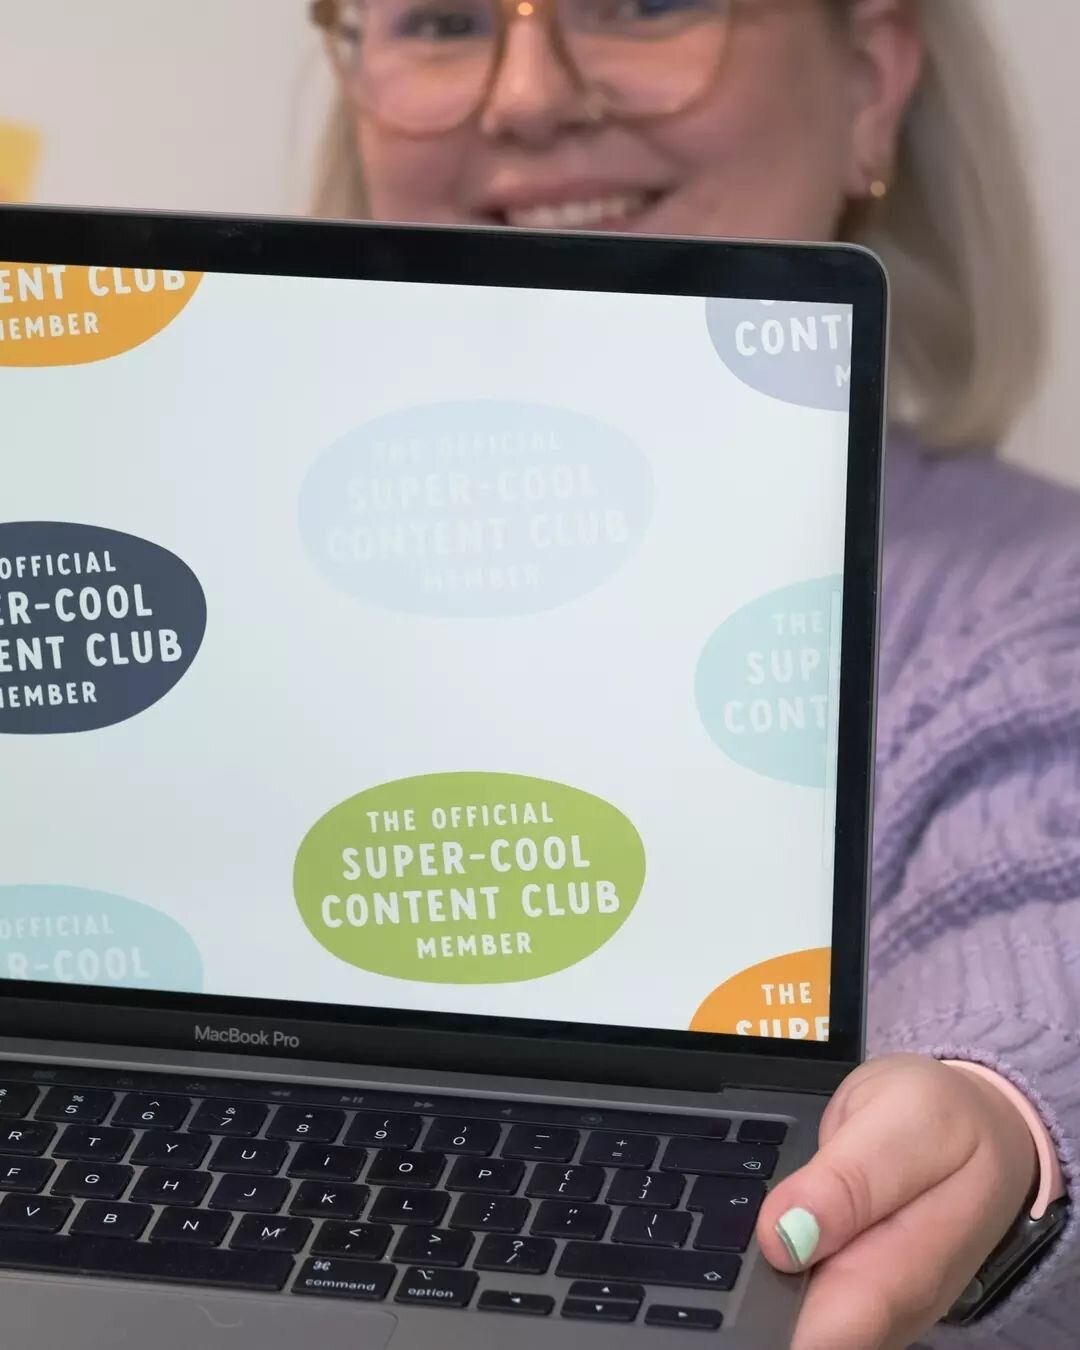 Answering your burrrrning questions about The Super-Cool Content Club&nbsp;👇👇👇

❓&nbsp;Q: is the Club just for service-based businesses or product-based businesses too?

😎&nbsp;A: EVERYONE! I'm a big believer that having a community of people aro